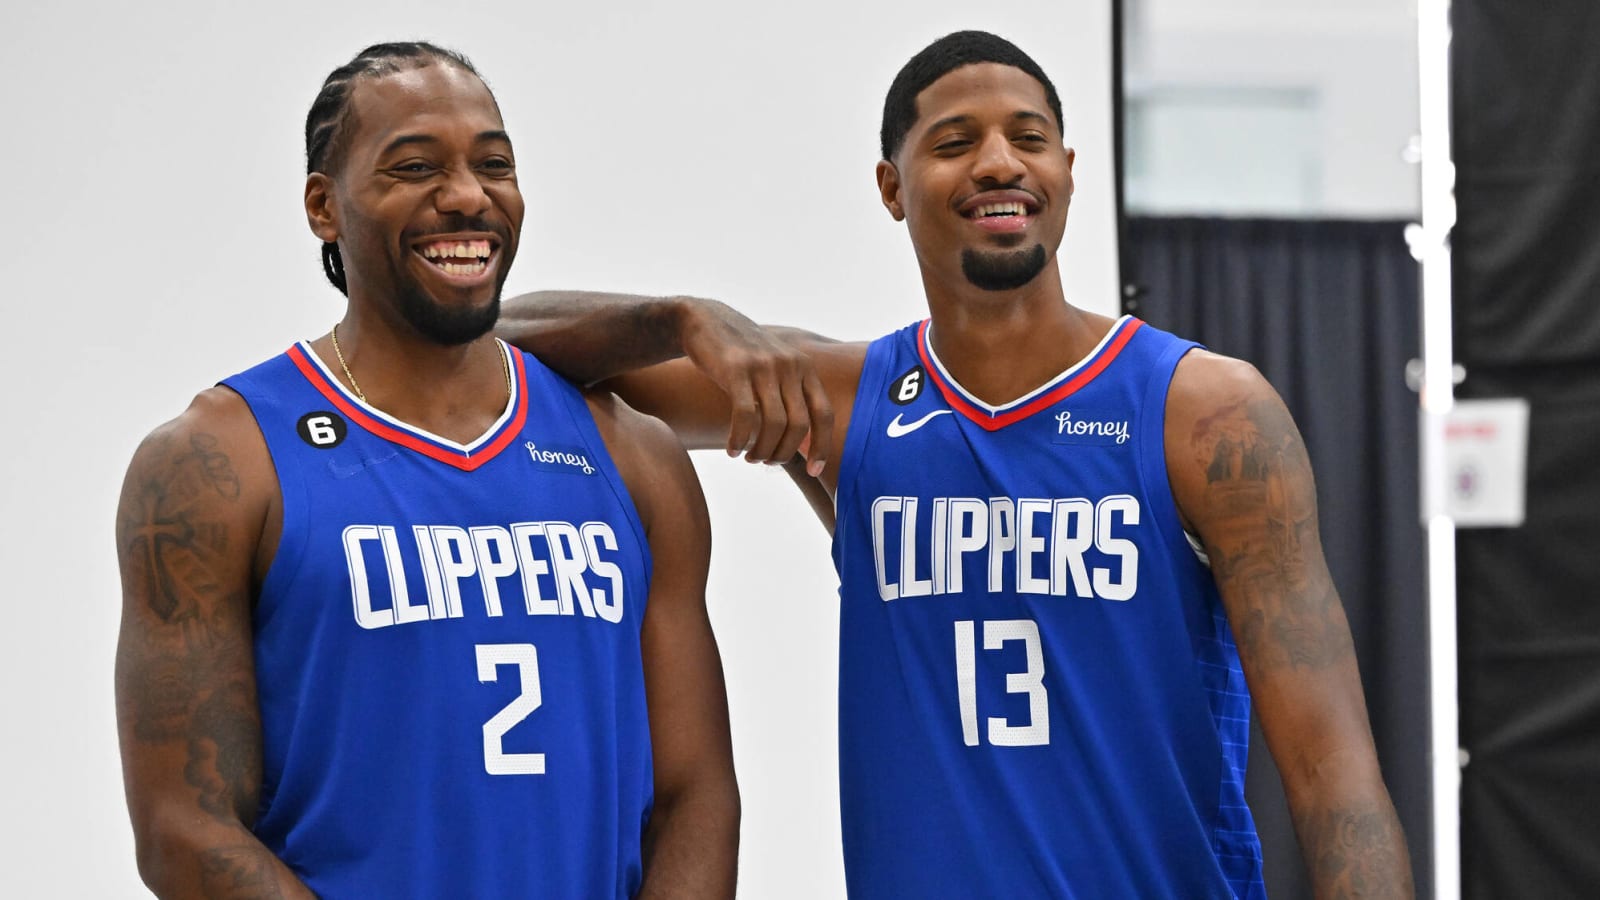 Clippers must feel urgency to see Kawhi Leonard and Paul George share the floor